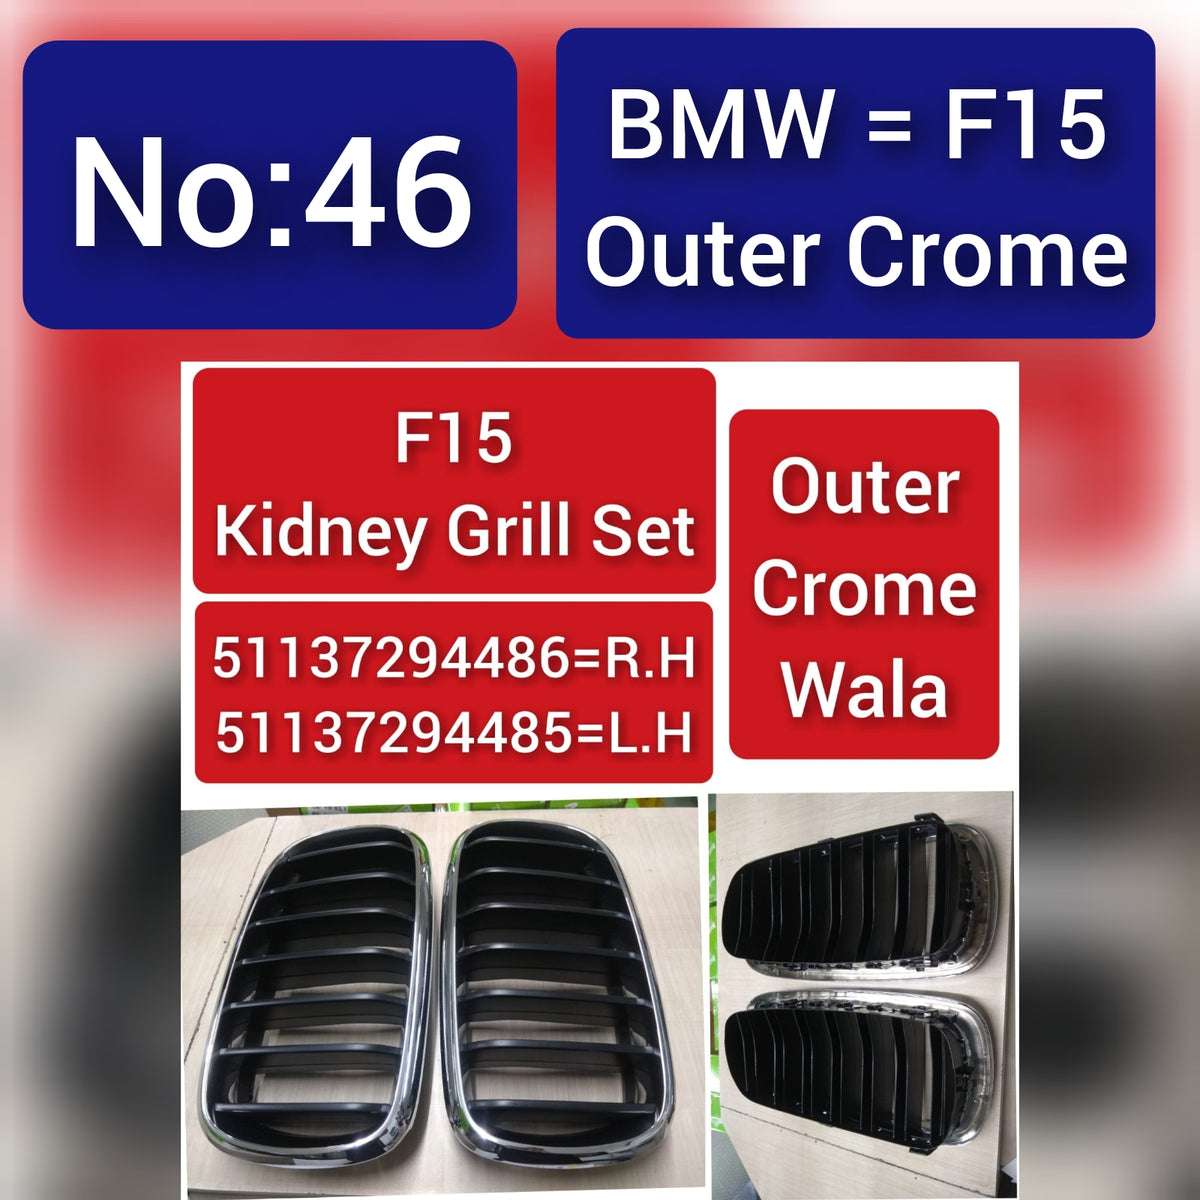 BMW = F15 Outer Crome F15 Kidney Grill Set 51137294486=R.H,51137294485=L.H  Outer Crome Wala Tag 46